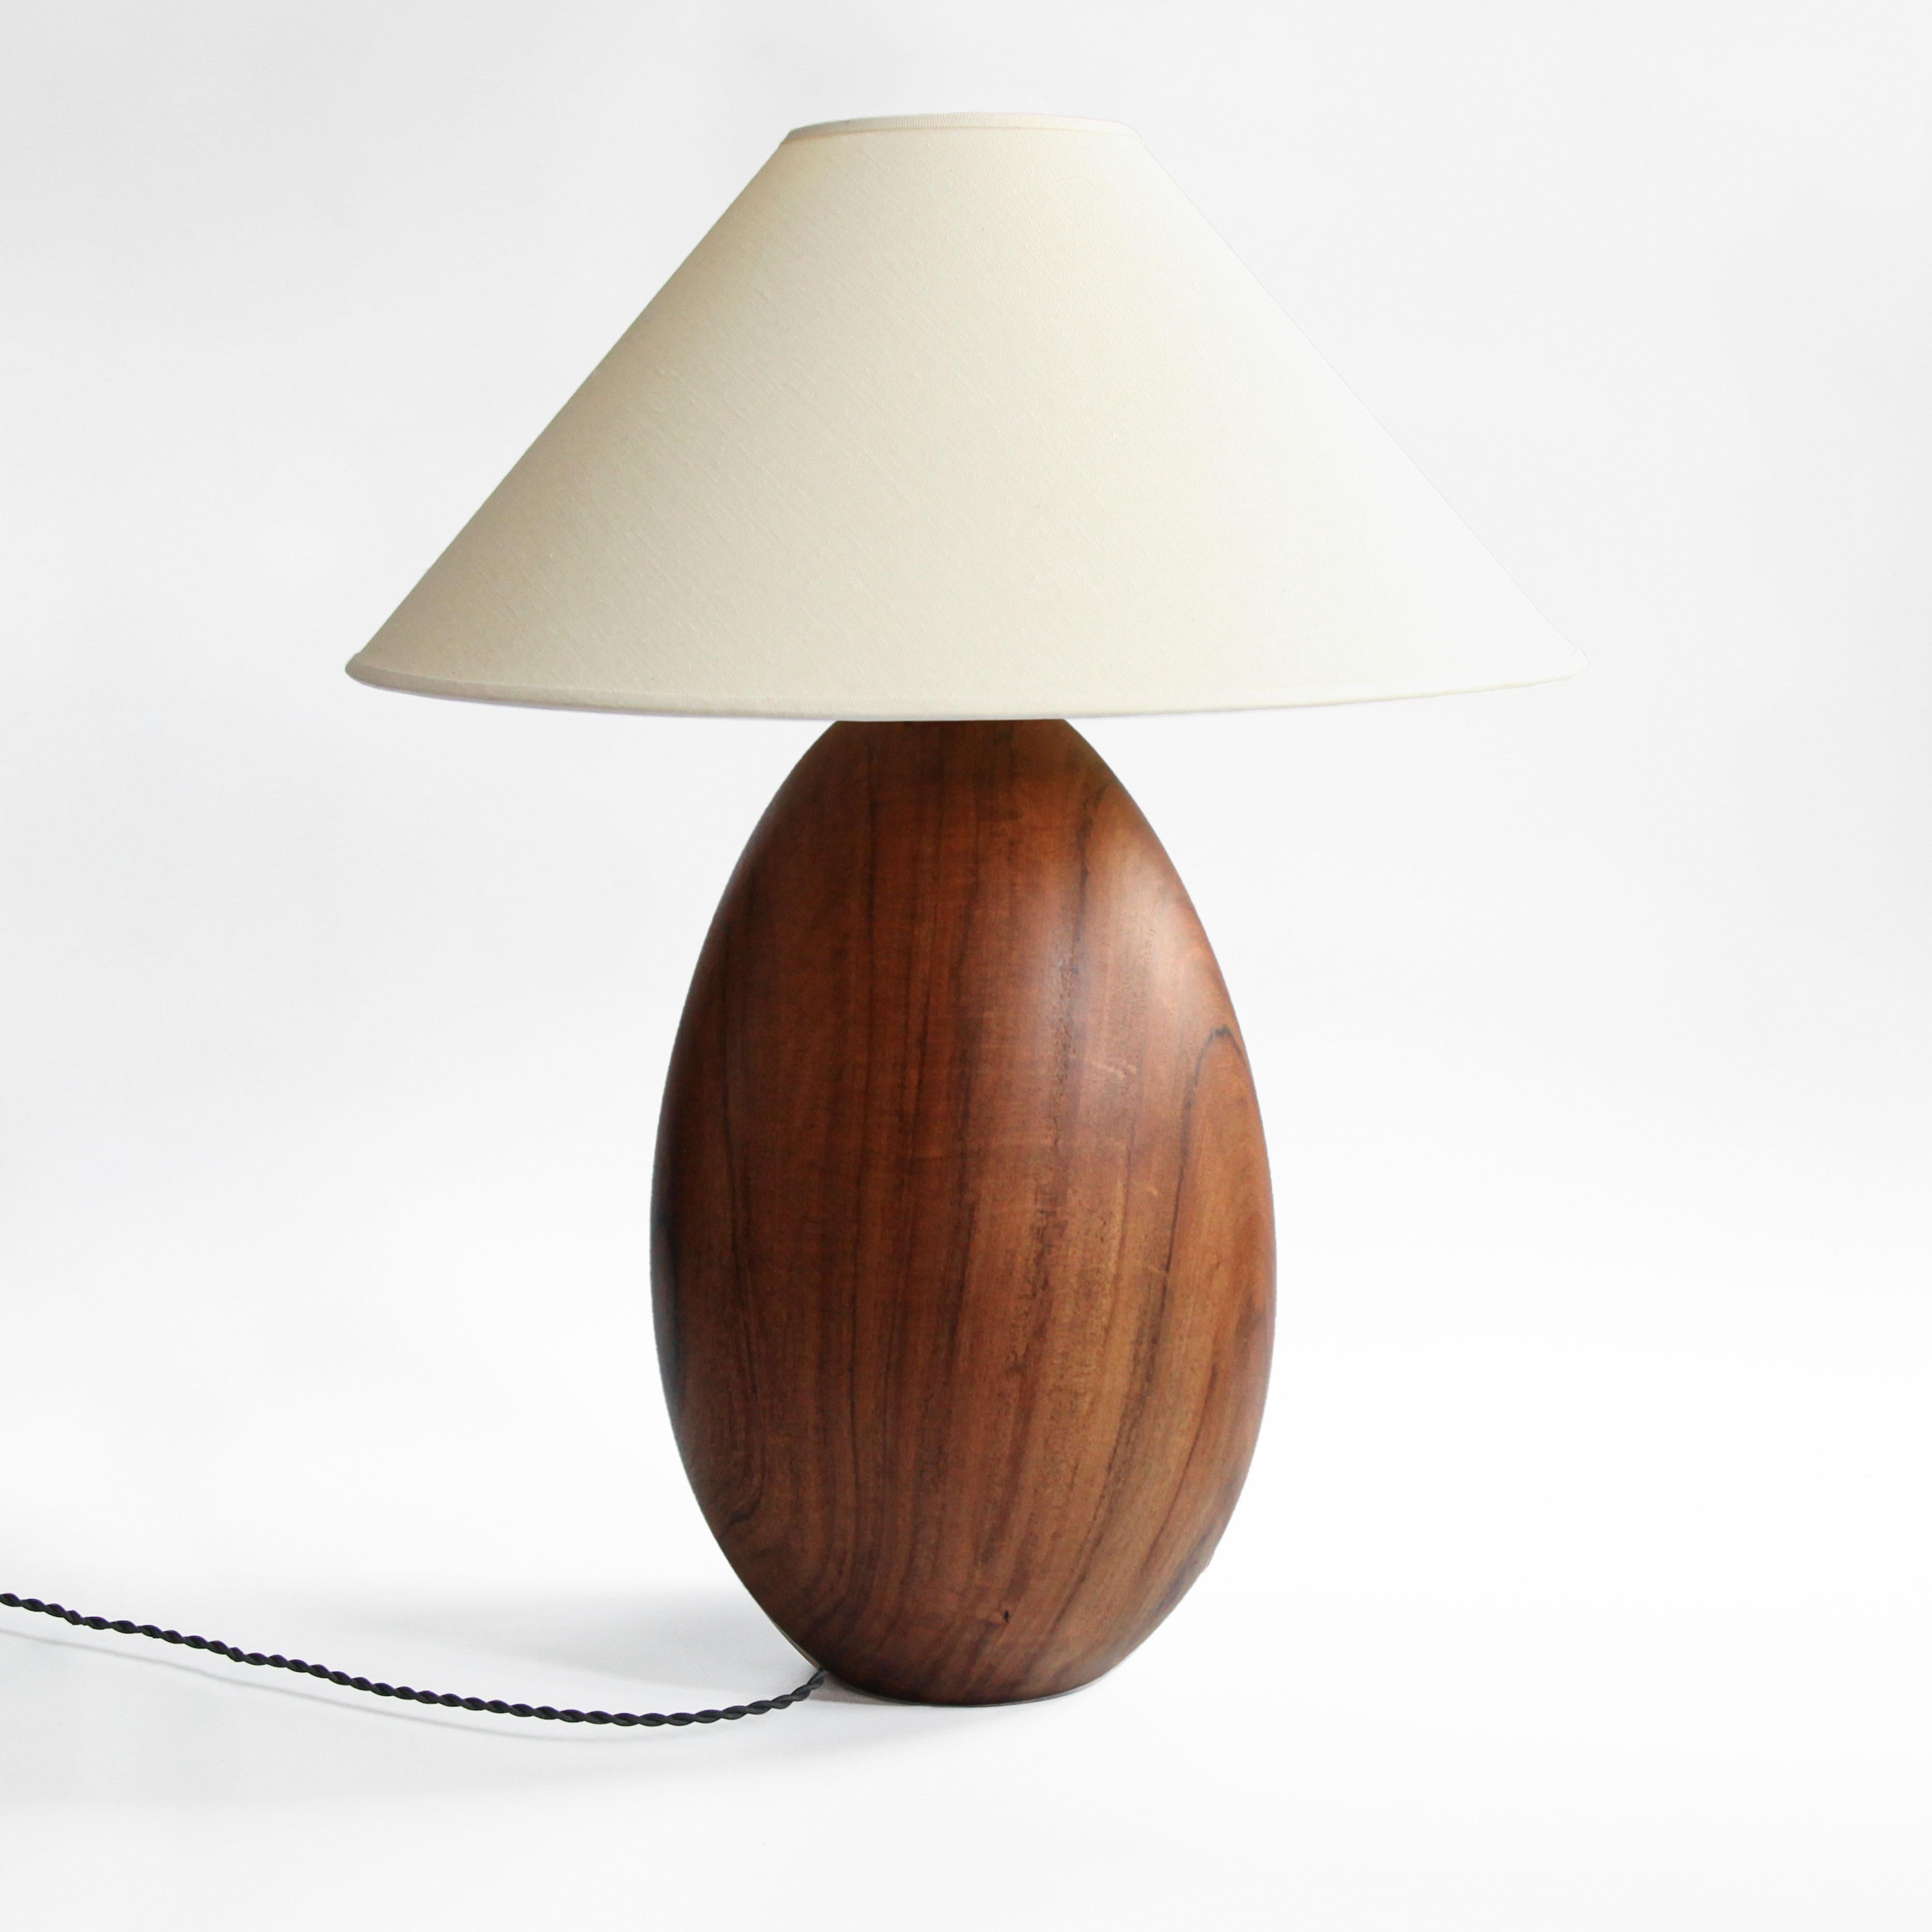 The Árbol collection is an embrace of tropical modernism; each lamp is composed of salvaged tropical hardwoods from the Bolivian city of Santa Cruz, where trees that are felled by natural causes-or for construction-are rescued by our team. A blend